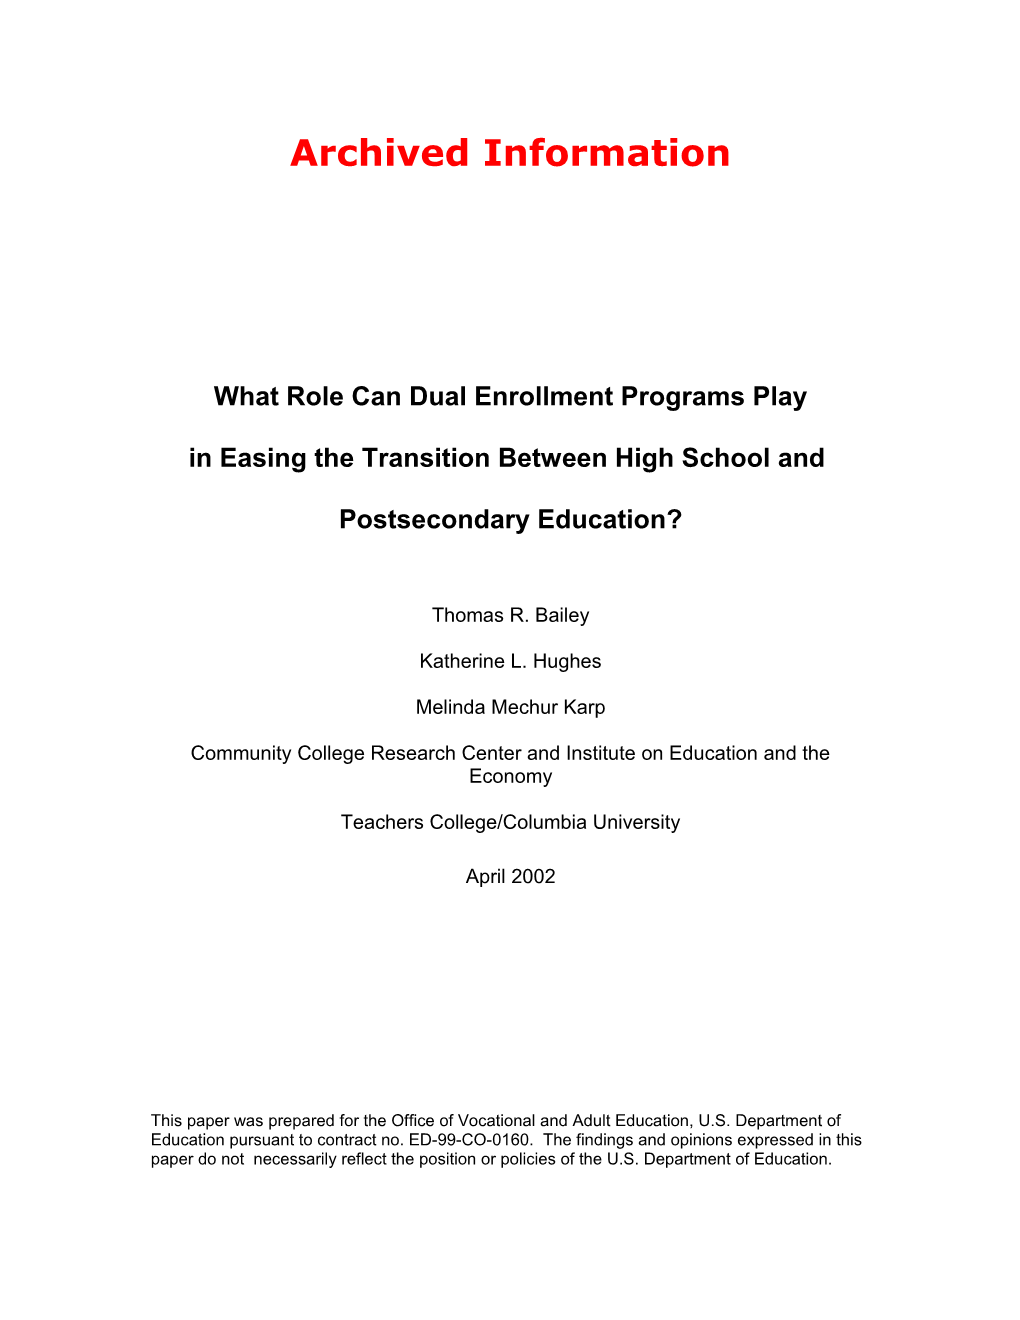 Archived: What Role Can Dual Enrollment Programs Play in Easing the Transition Between